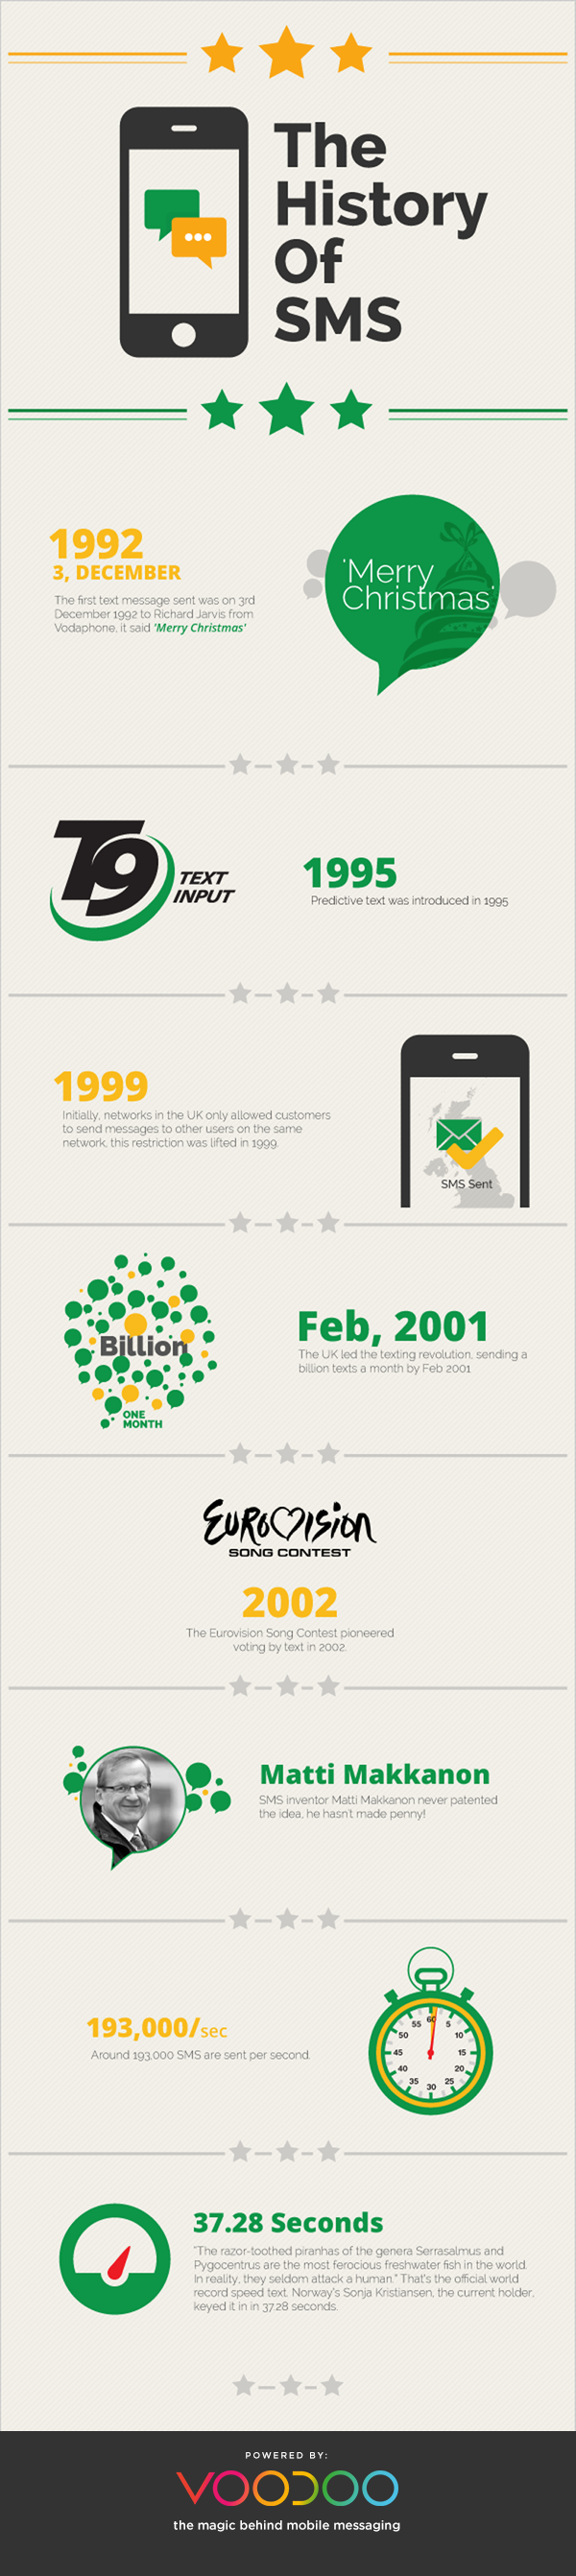 THE HISTORY OF SMS